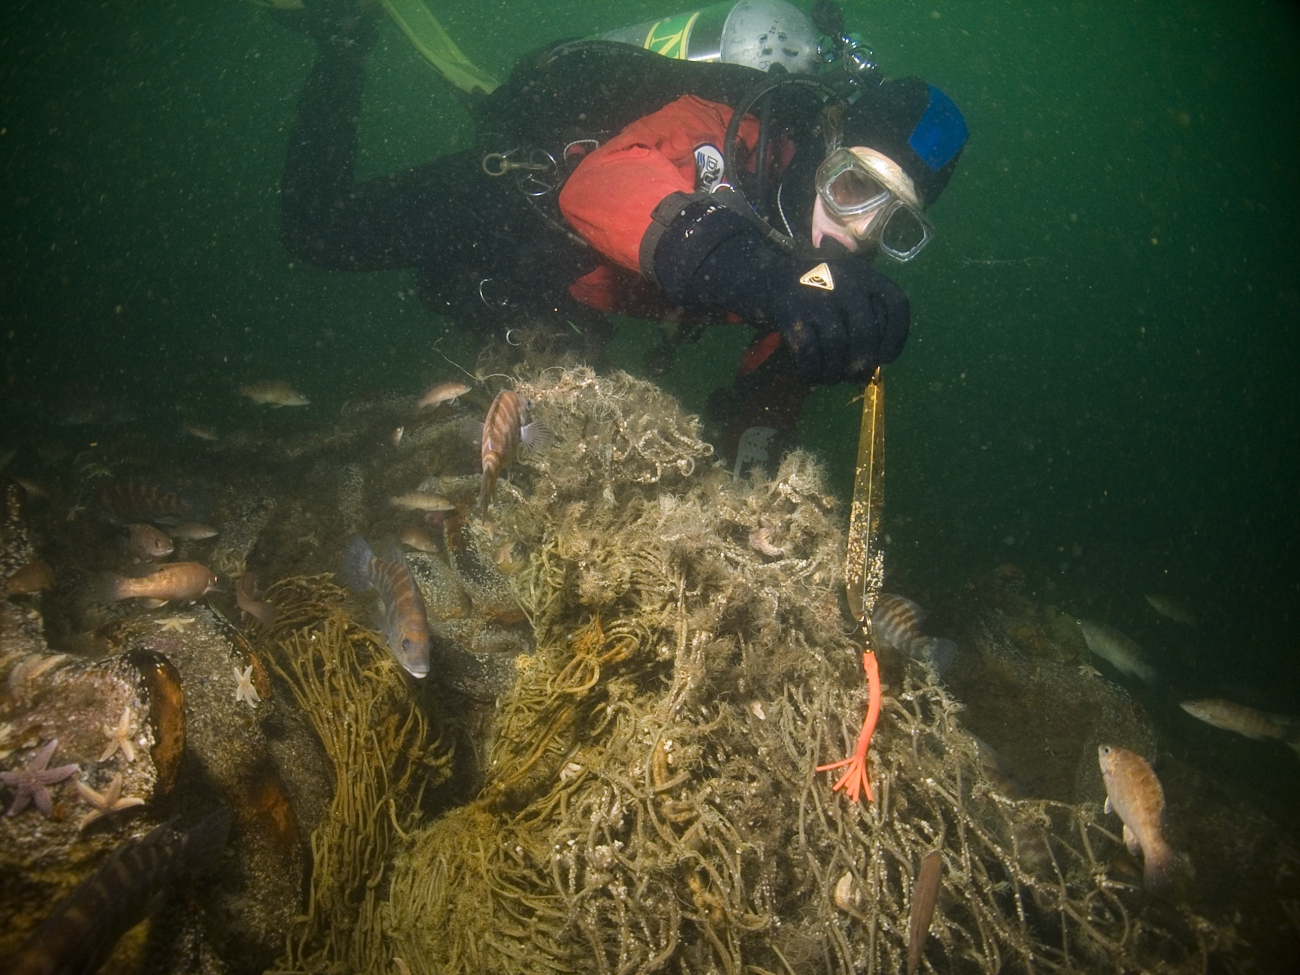 Marine debris on the shipwreck of the coal schooner Paul Palmerincludes recreational fishing line and jigs